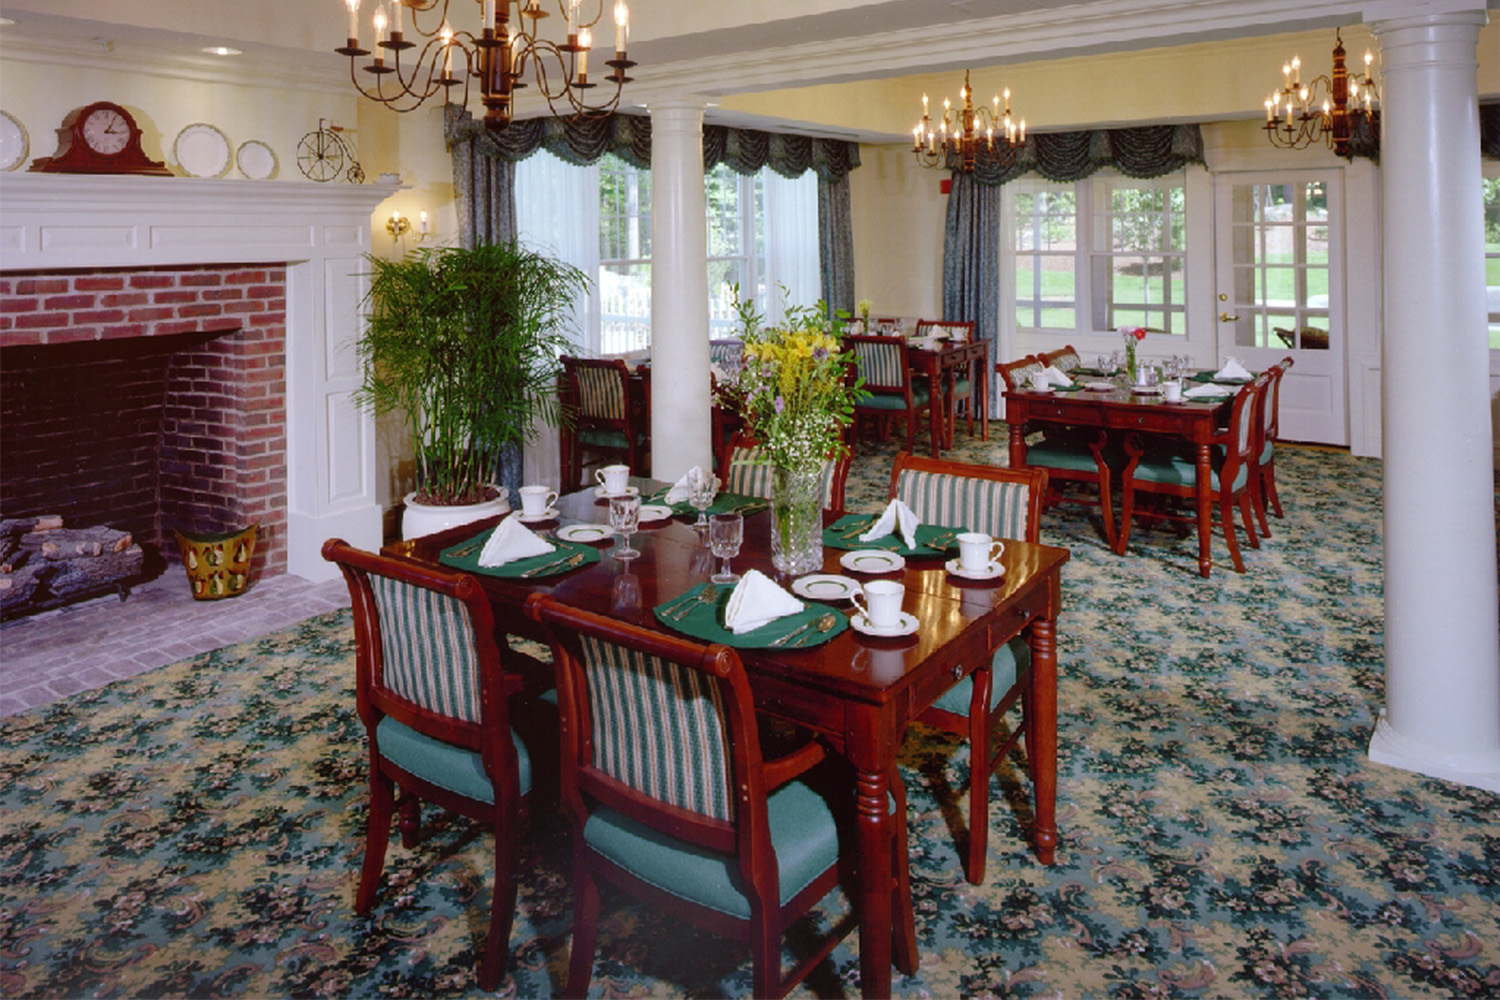 Dining area with fireplace, multiple large windows, and cherrywood chairs and tables 